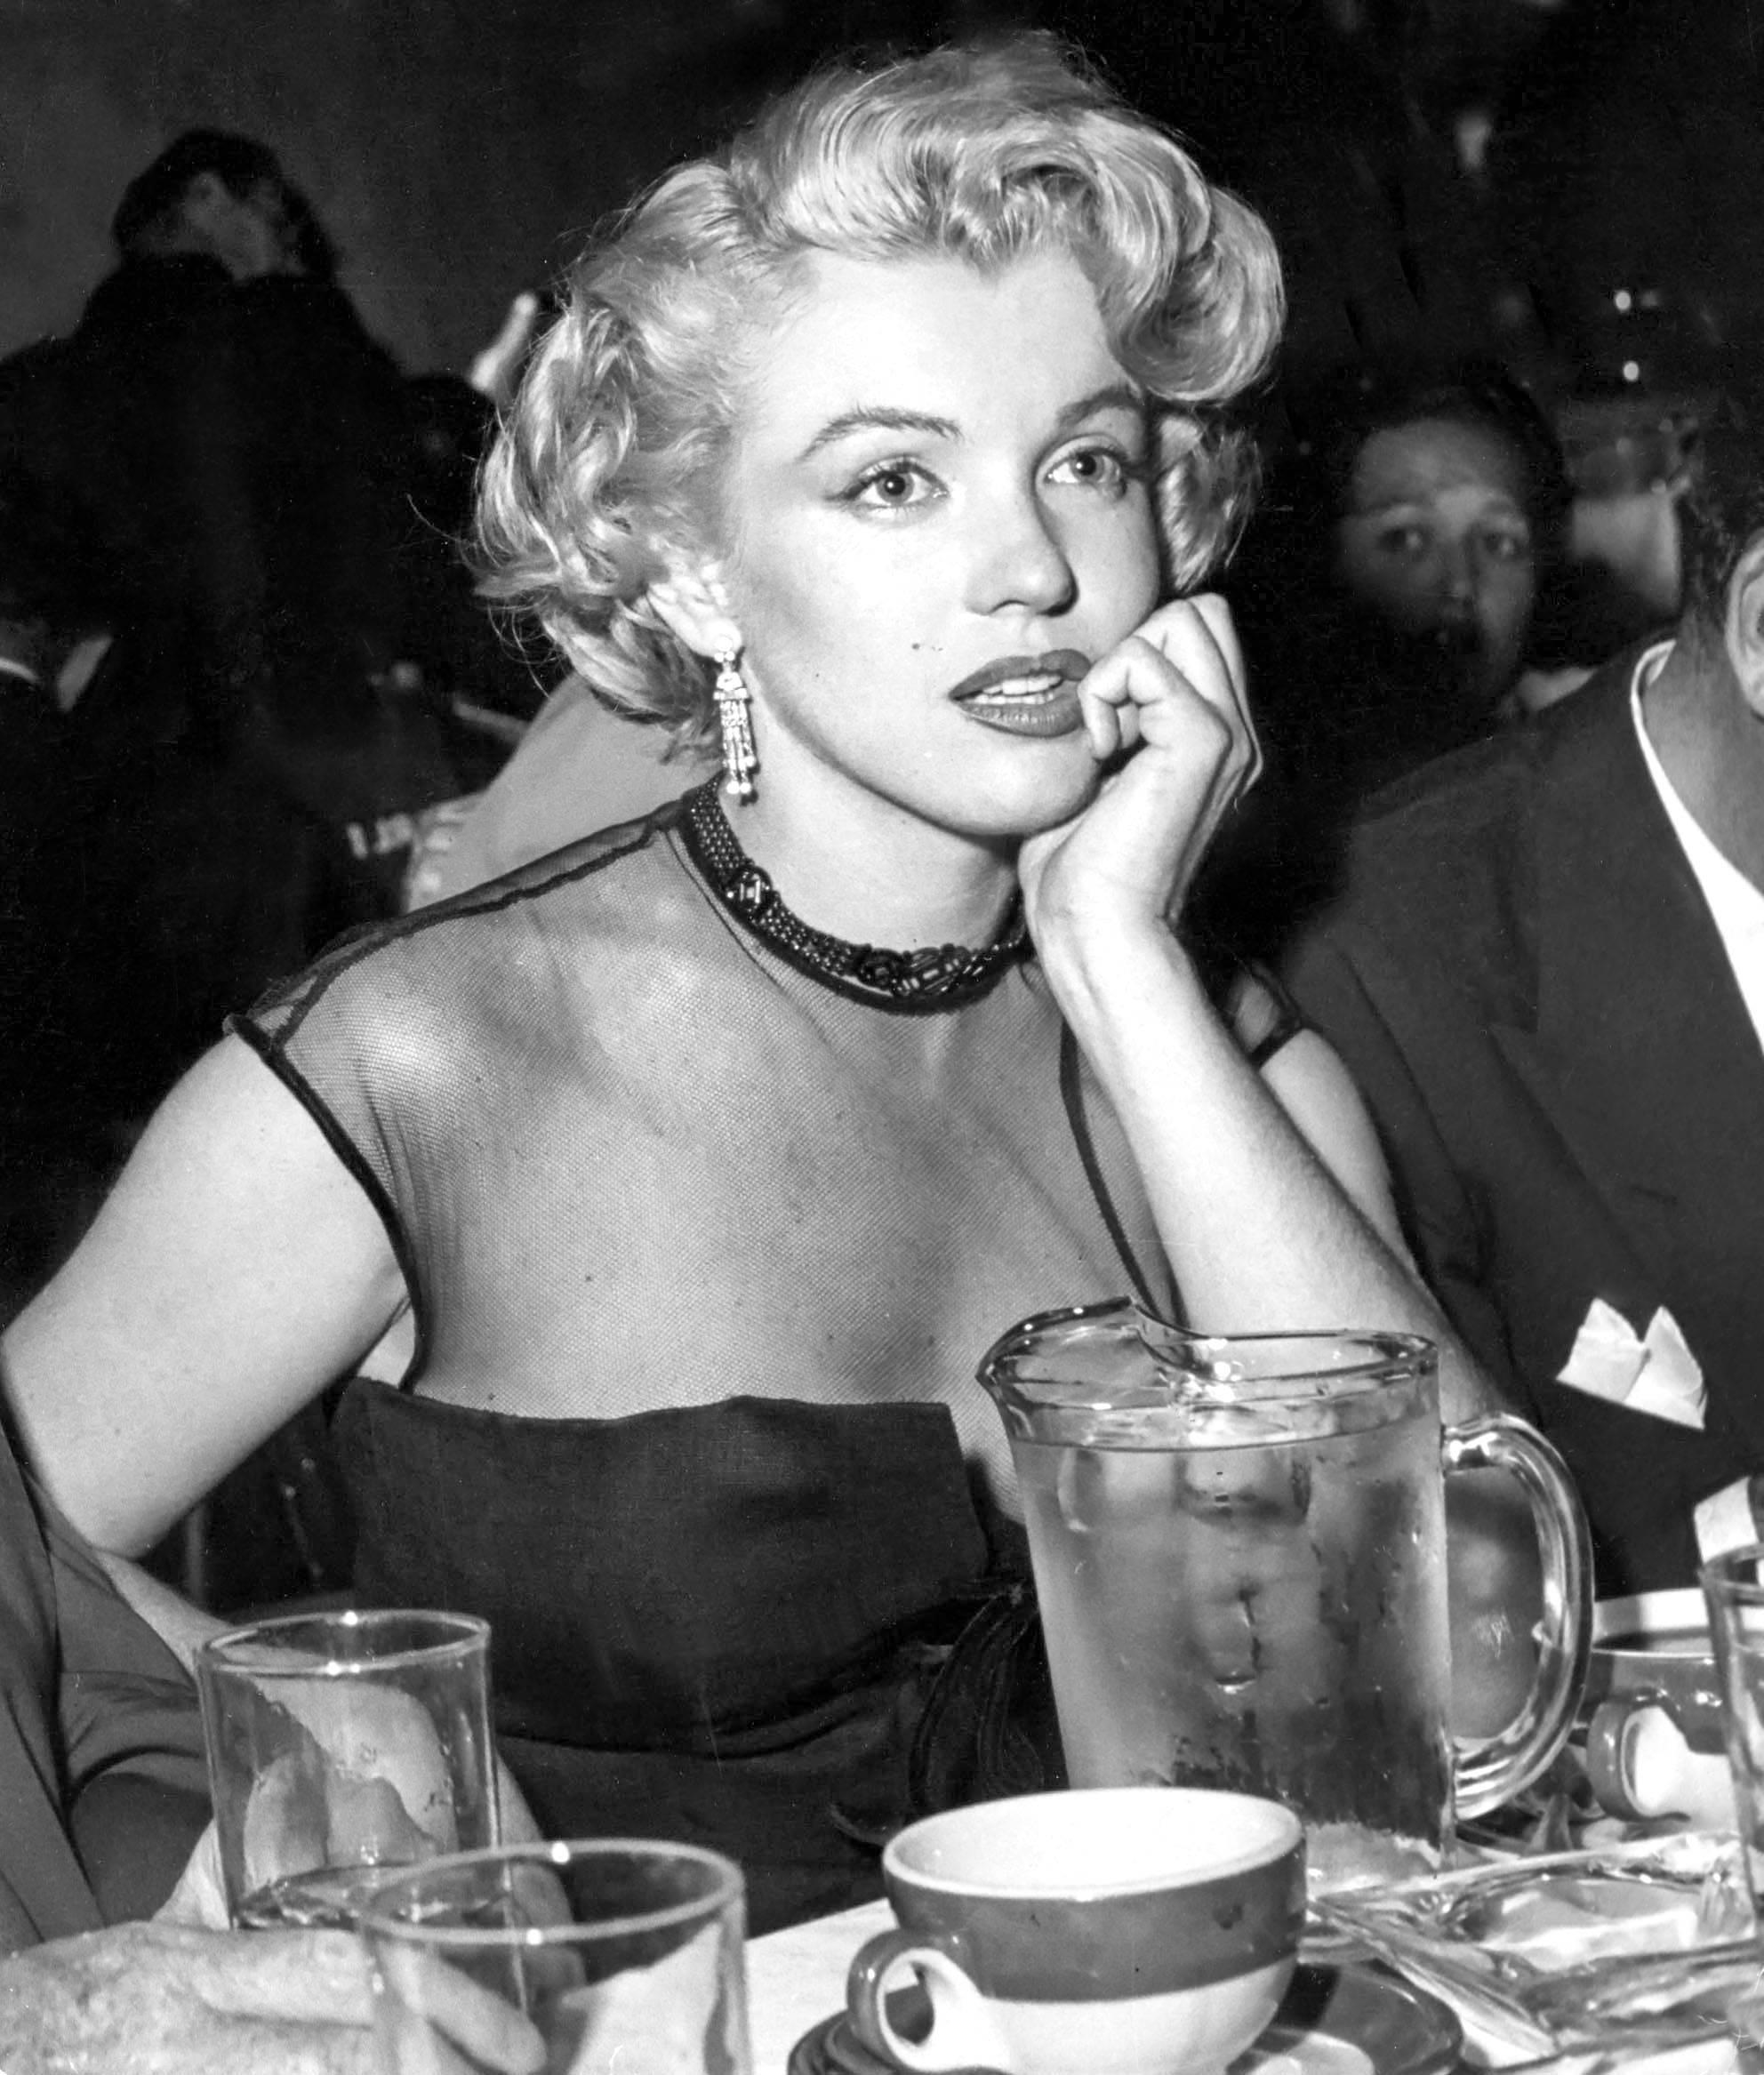 Unknown Portrait Photograph - Marilyn Candid at Dinner Fine Art Print